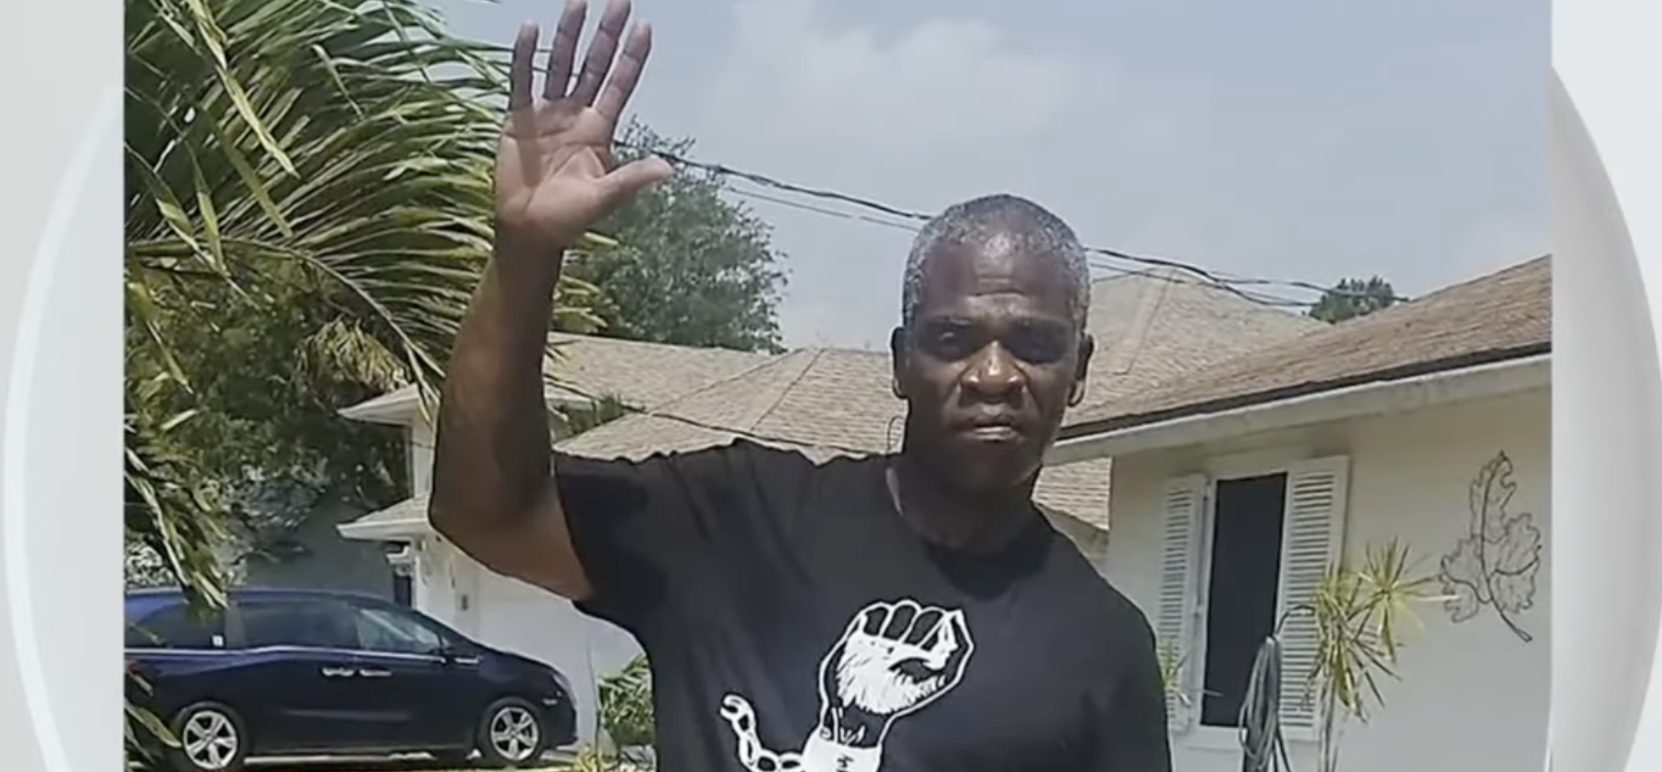 Say What Now? Man Who Spent 16 Years in Prison on Wrongful Conviction Fatally Shot by Police During Traffic Stop in Florida [Video]